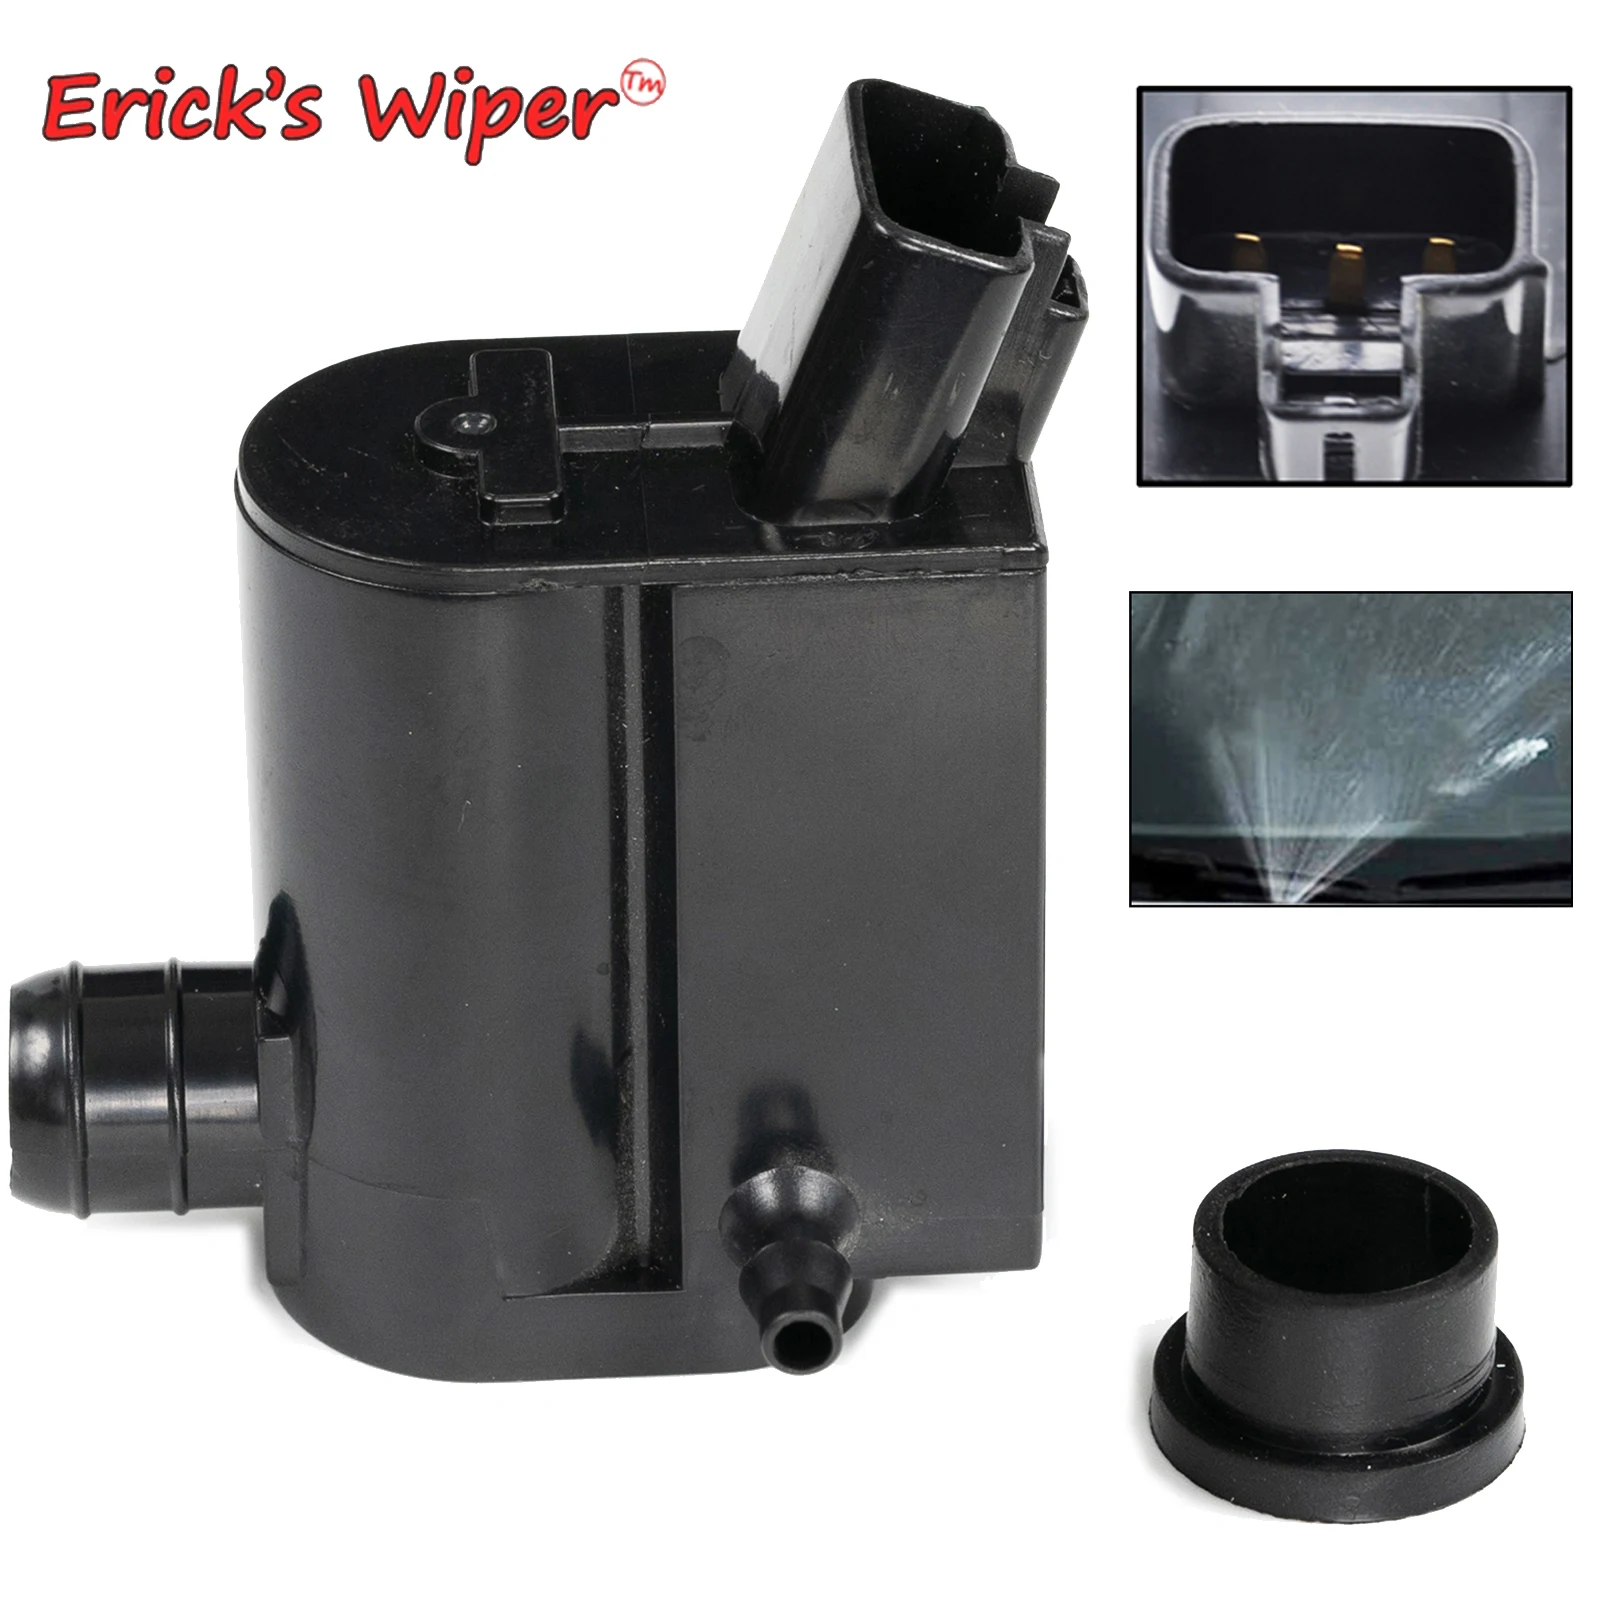 Erick's Wiper Twin Outlet Windshield Washer Pump Motor For Brilliance V5 BS2 FRV FSV Cross  # 5207010-05